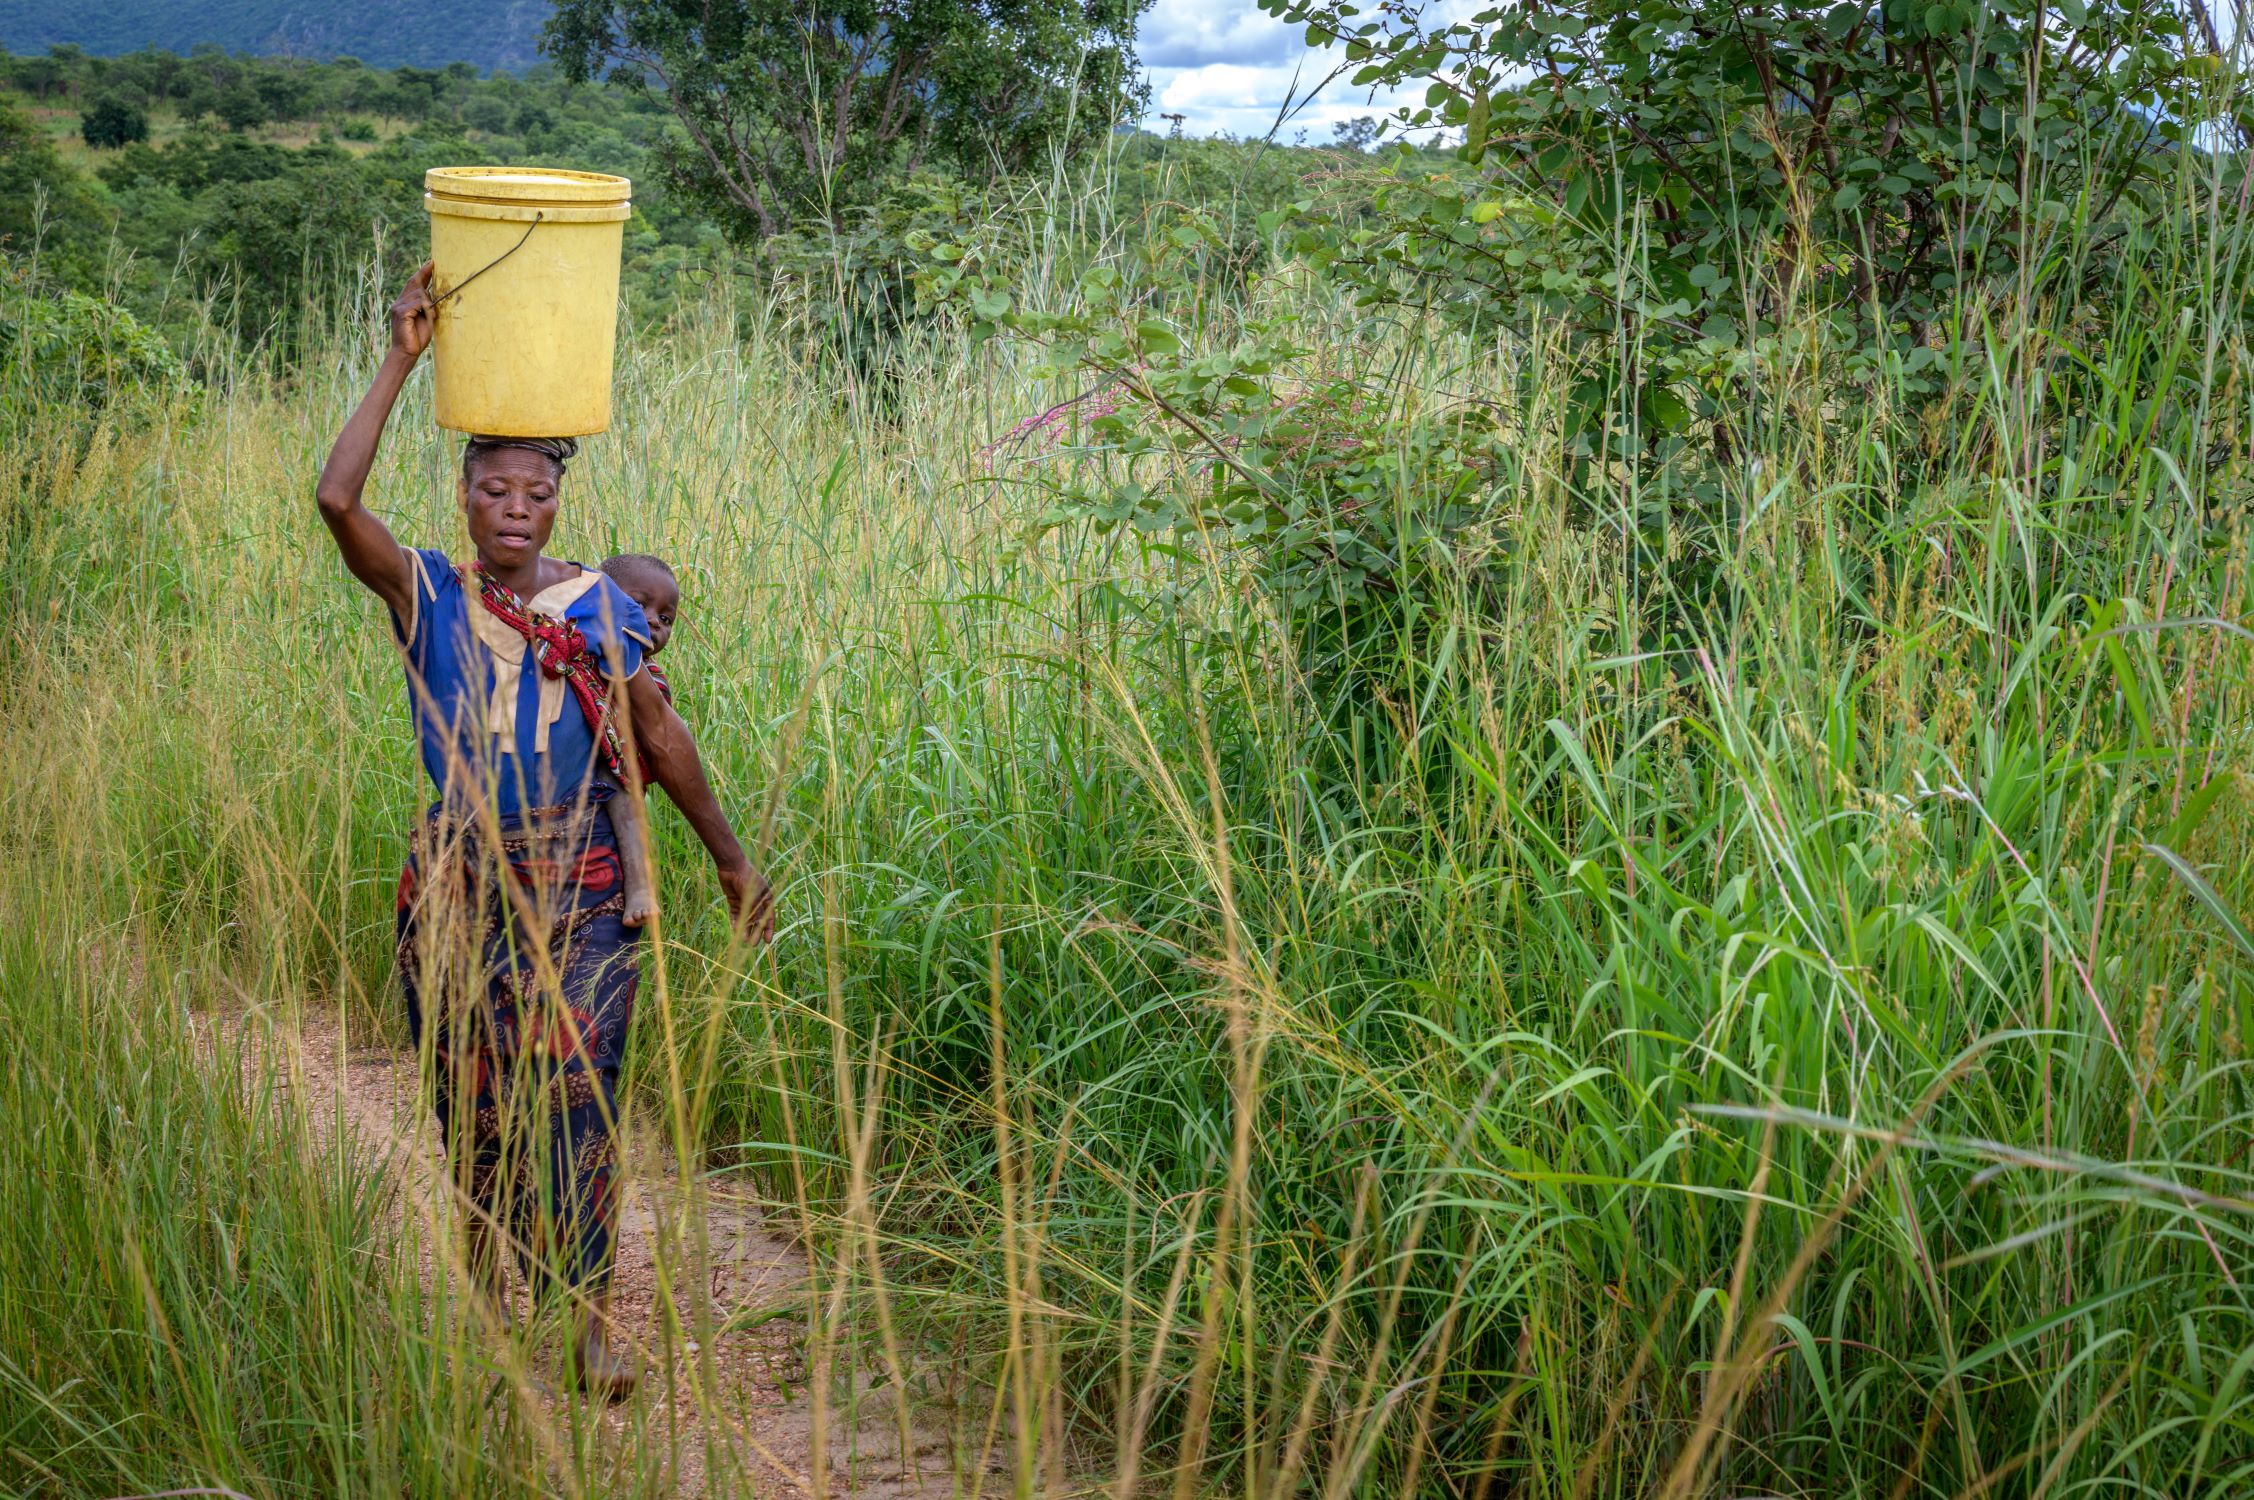 Zambian lady carrying water container on her head